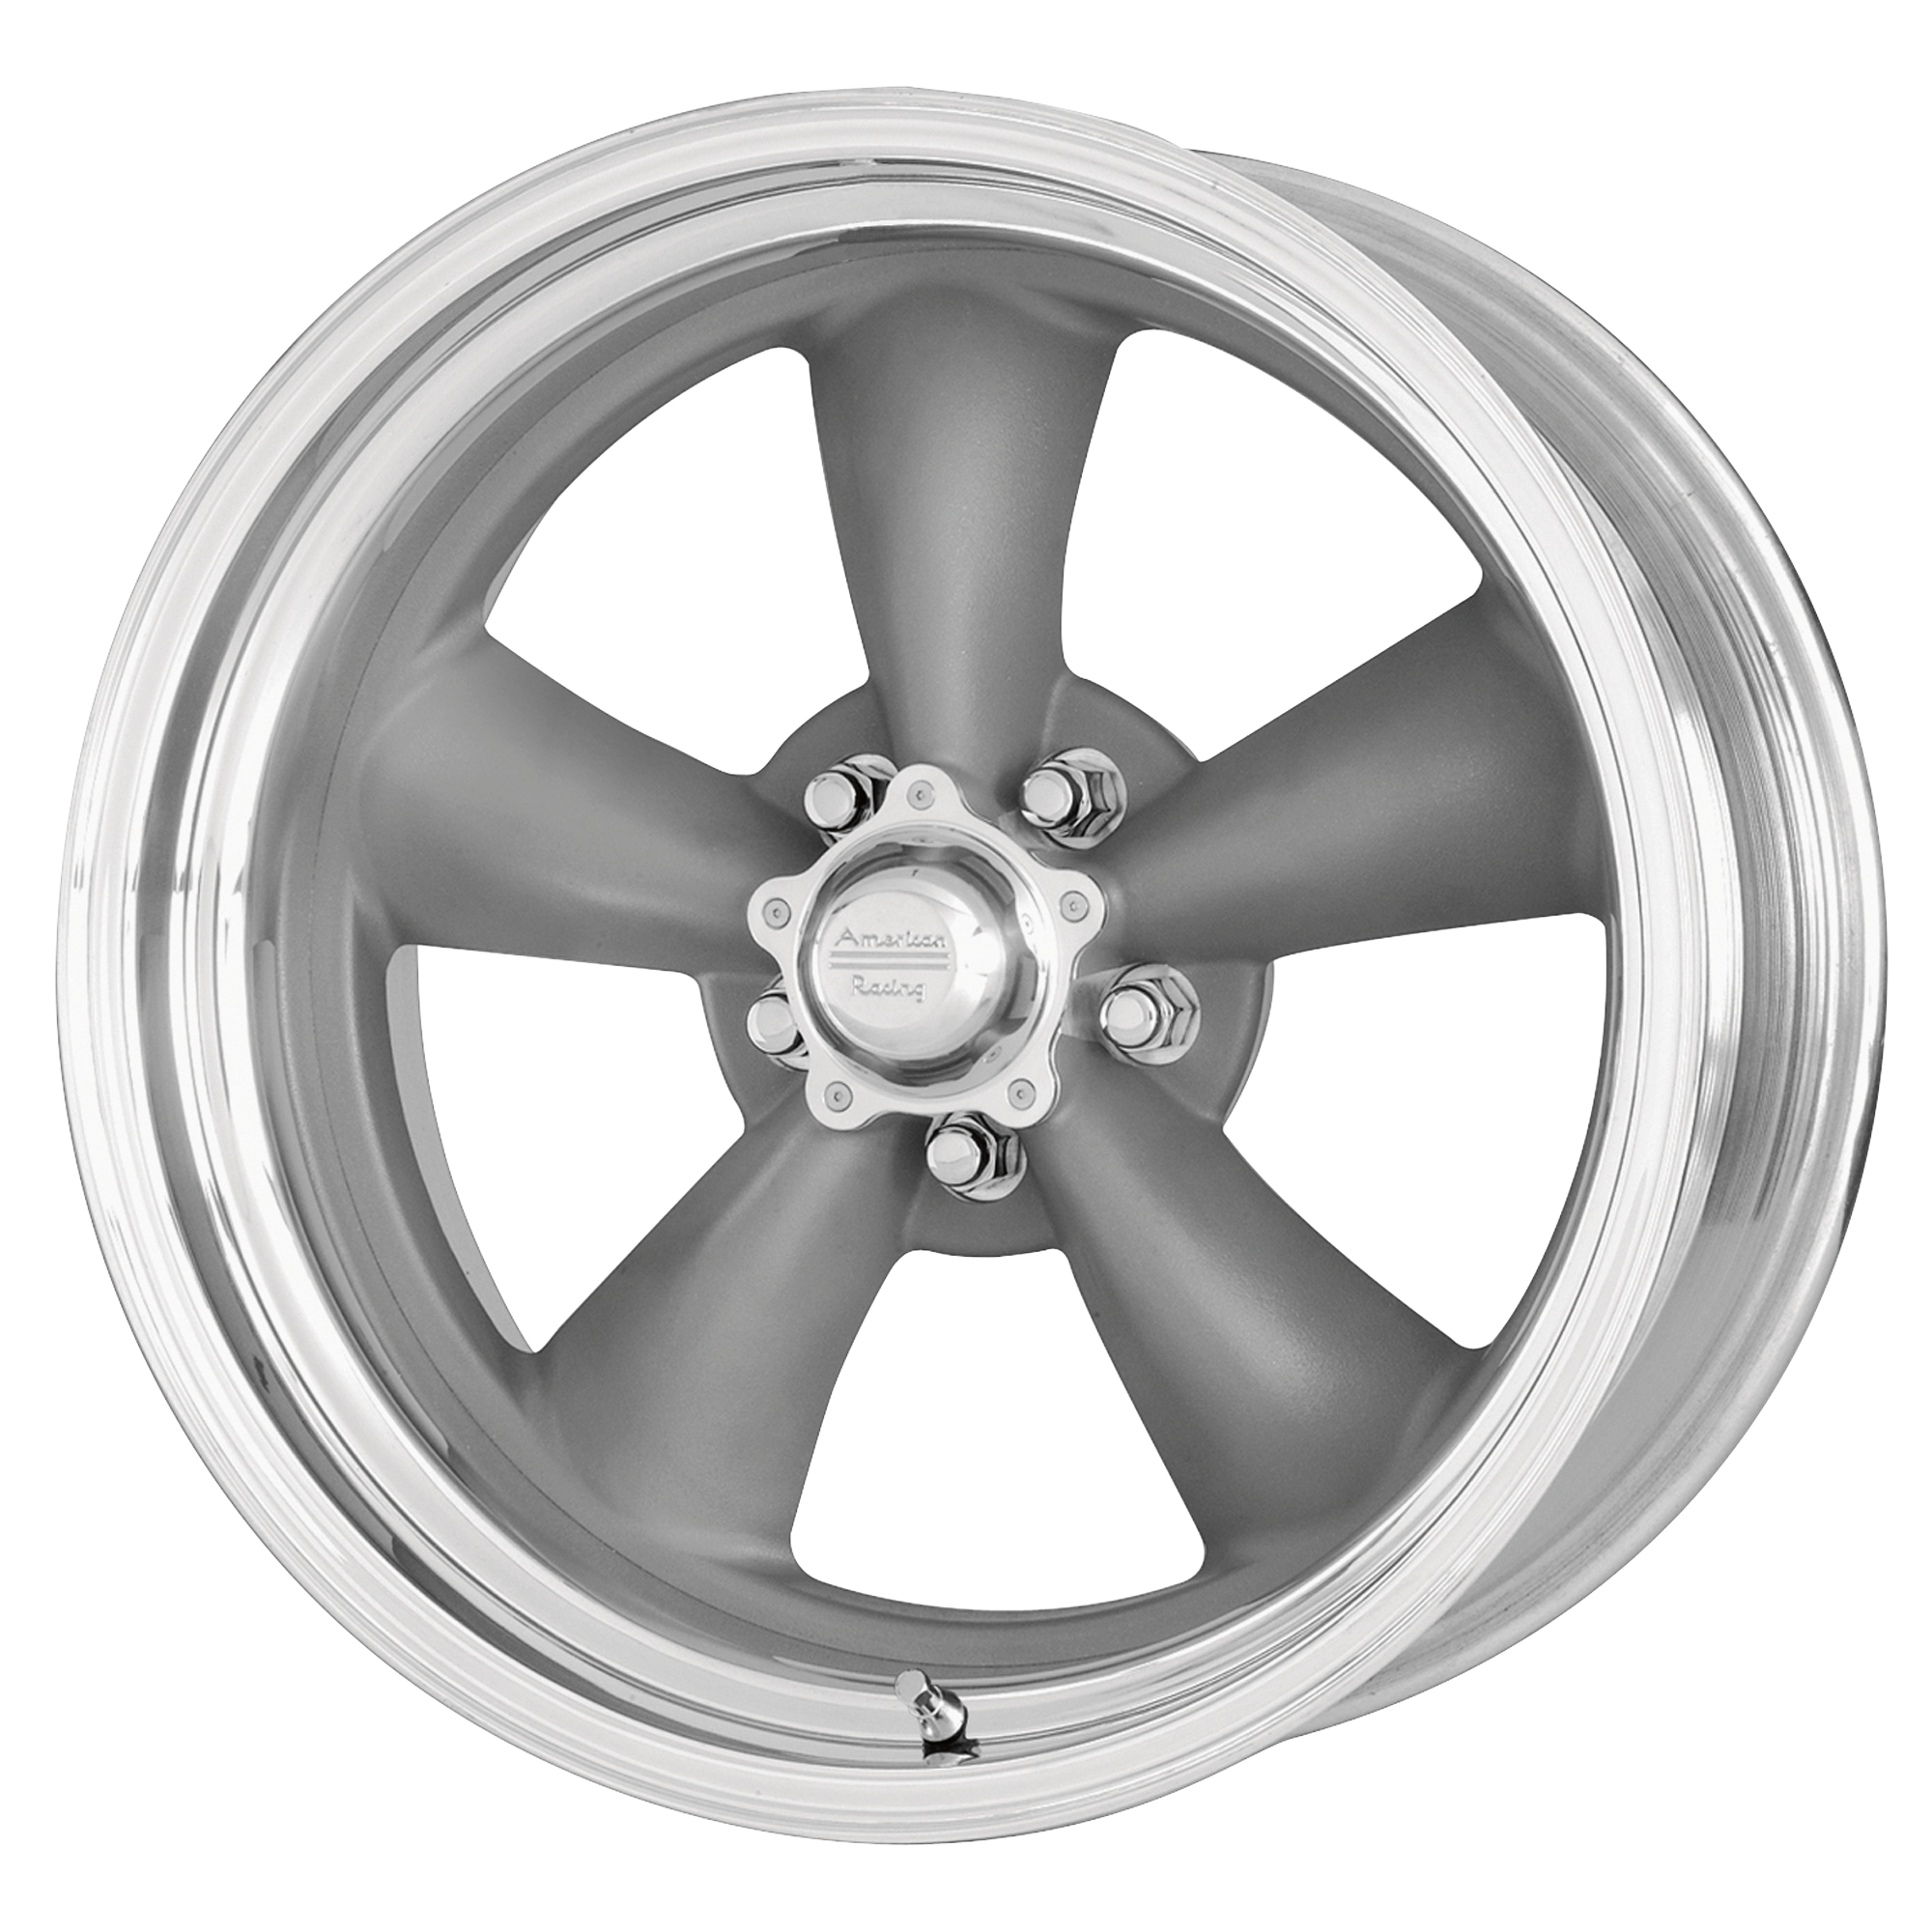 CLASSIC TORQ THRUST II ONE PIECE 20x10 Blank MAG GRAY W/ MACHINED LIP (6 mm) - Tires and Engine Performance